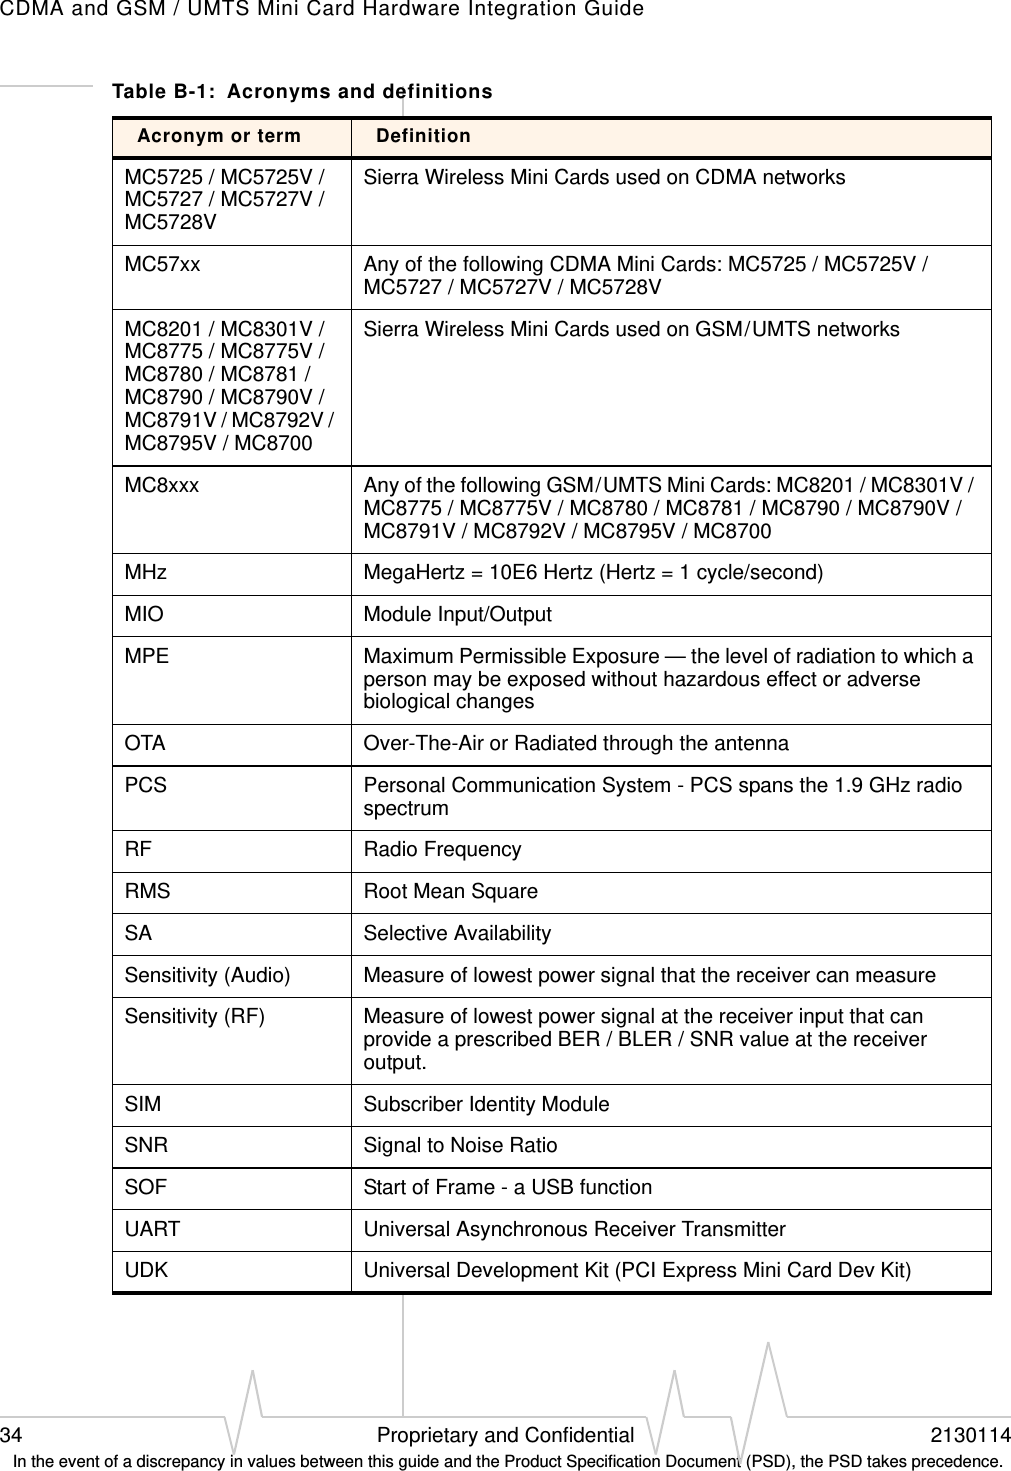 CDMA and GSM / UMTS Mini Card Hardware Integration Guide34 Proprietary and Confidential 2130114 In the event of a discrepancy in values between this guide and the Product Specification Document (PSD), the PSD takes precedence.MC5725 / MC5725V / MC5727 / MC5727V /  MC5728VSierra Wireless Mini Cards used on CDMA networksMC57xx Any of the following CDMA Mini Cards: MC5725 / MC5725V / MC5727 / MC5727V / MC5728VMC8201 / MC8301V / MC8775 / MC8775V /MC8780 / MC8781 / MC8790 / MC8790V / MC8791V / MC8792V / MC8795V / MC8700Sierra Wireless Mini Cards used on GSM / UMTS networksMC8xxx Any of the following GSM / UMTS Mini Cards: MC8201 / MC8301V / MC8775 / MC8775V / MC8780 / MC8781 / MC8790 / MC8790V / MC8791V / MC8792V / MC8795V / MC8700MHz MegaHertz = 10E6 Hertz (Hertz = 1 cycle/second)MIO Module Input/OutputMPE Maximum Permissible Exposure — the level of radiation to which a person may be exposed without hazardous effect or adverse biological changesOTA Over-The-Air or Radiated through the antennaPCS Personal Communication System - PCS spans the 1.9 GHz radio spectrumRF Radio FrequencyRMS Root Mean SquareSA Selective AvailabilitySensitivity (Audio) Measure of lowest power signal that the receiver can measureSensitivity (RF) Measure of lowest power signal at the receiver input that can provide a prescribed BER / BLER / SNR value at the receiver output.SIM Subscriber Identity ModuleSNR Signal to Noise RatioSOF Start of Frame - a USB functionUART Universal Asynchronous Receiver TransmitterUDK Universal Development Kit (PCI Express Mini Card Dev Kit)Table B-1:  Acronyms and definitionsAcronym or term Definition